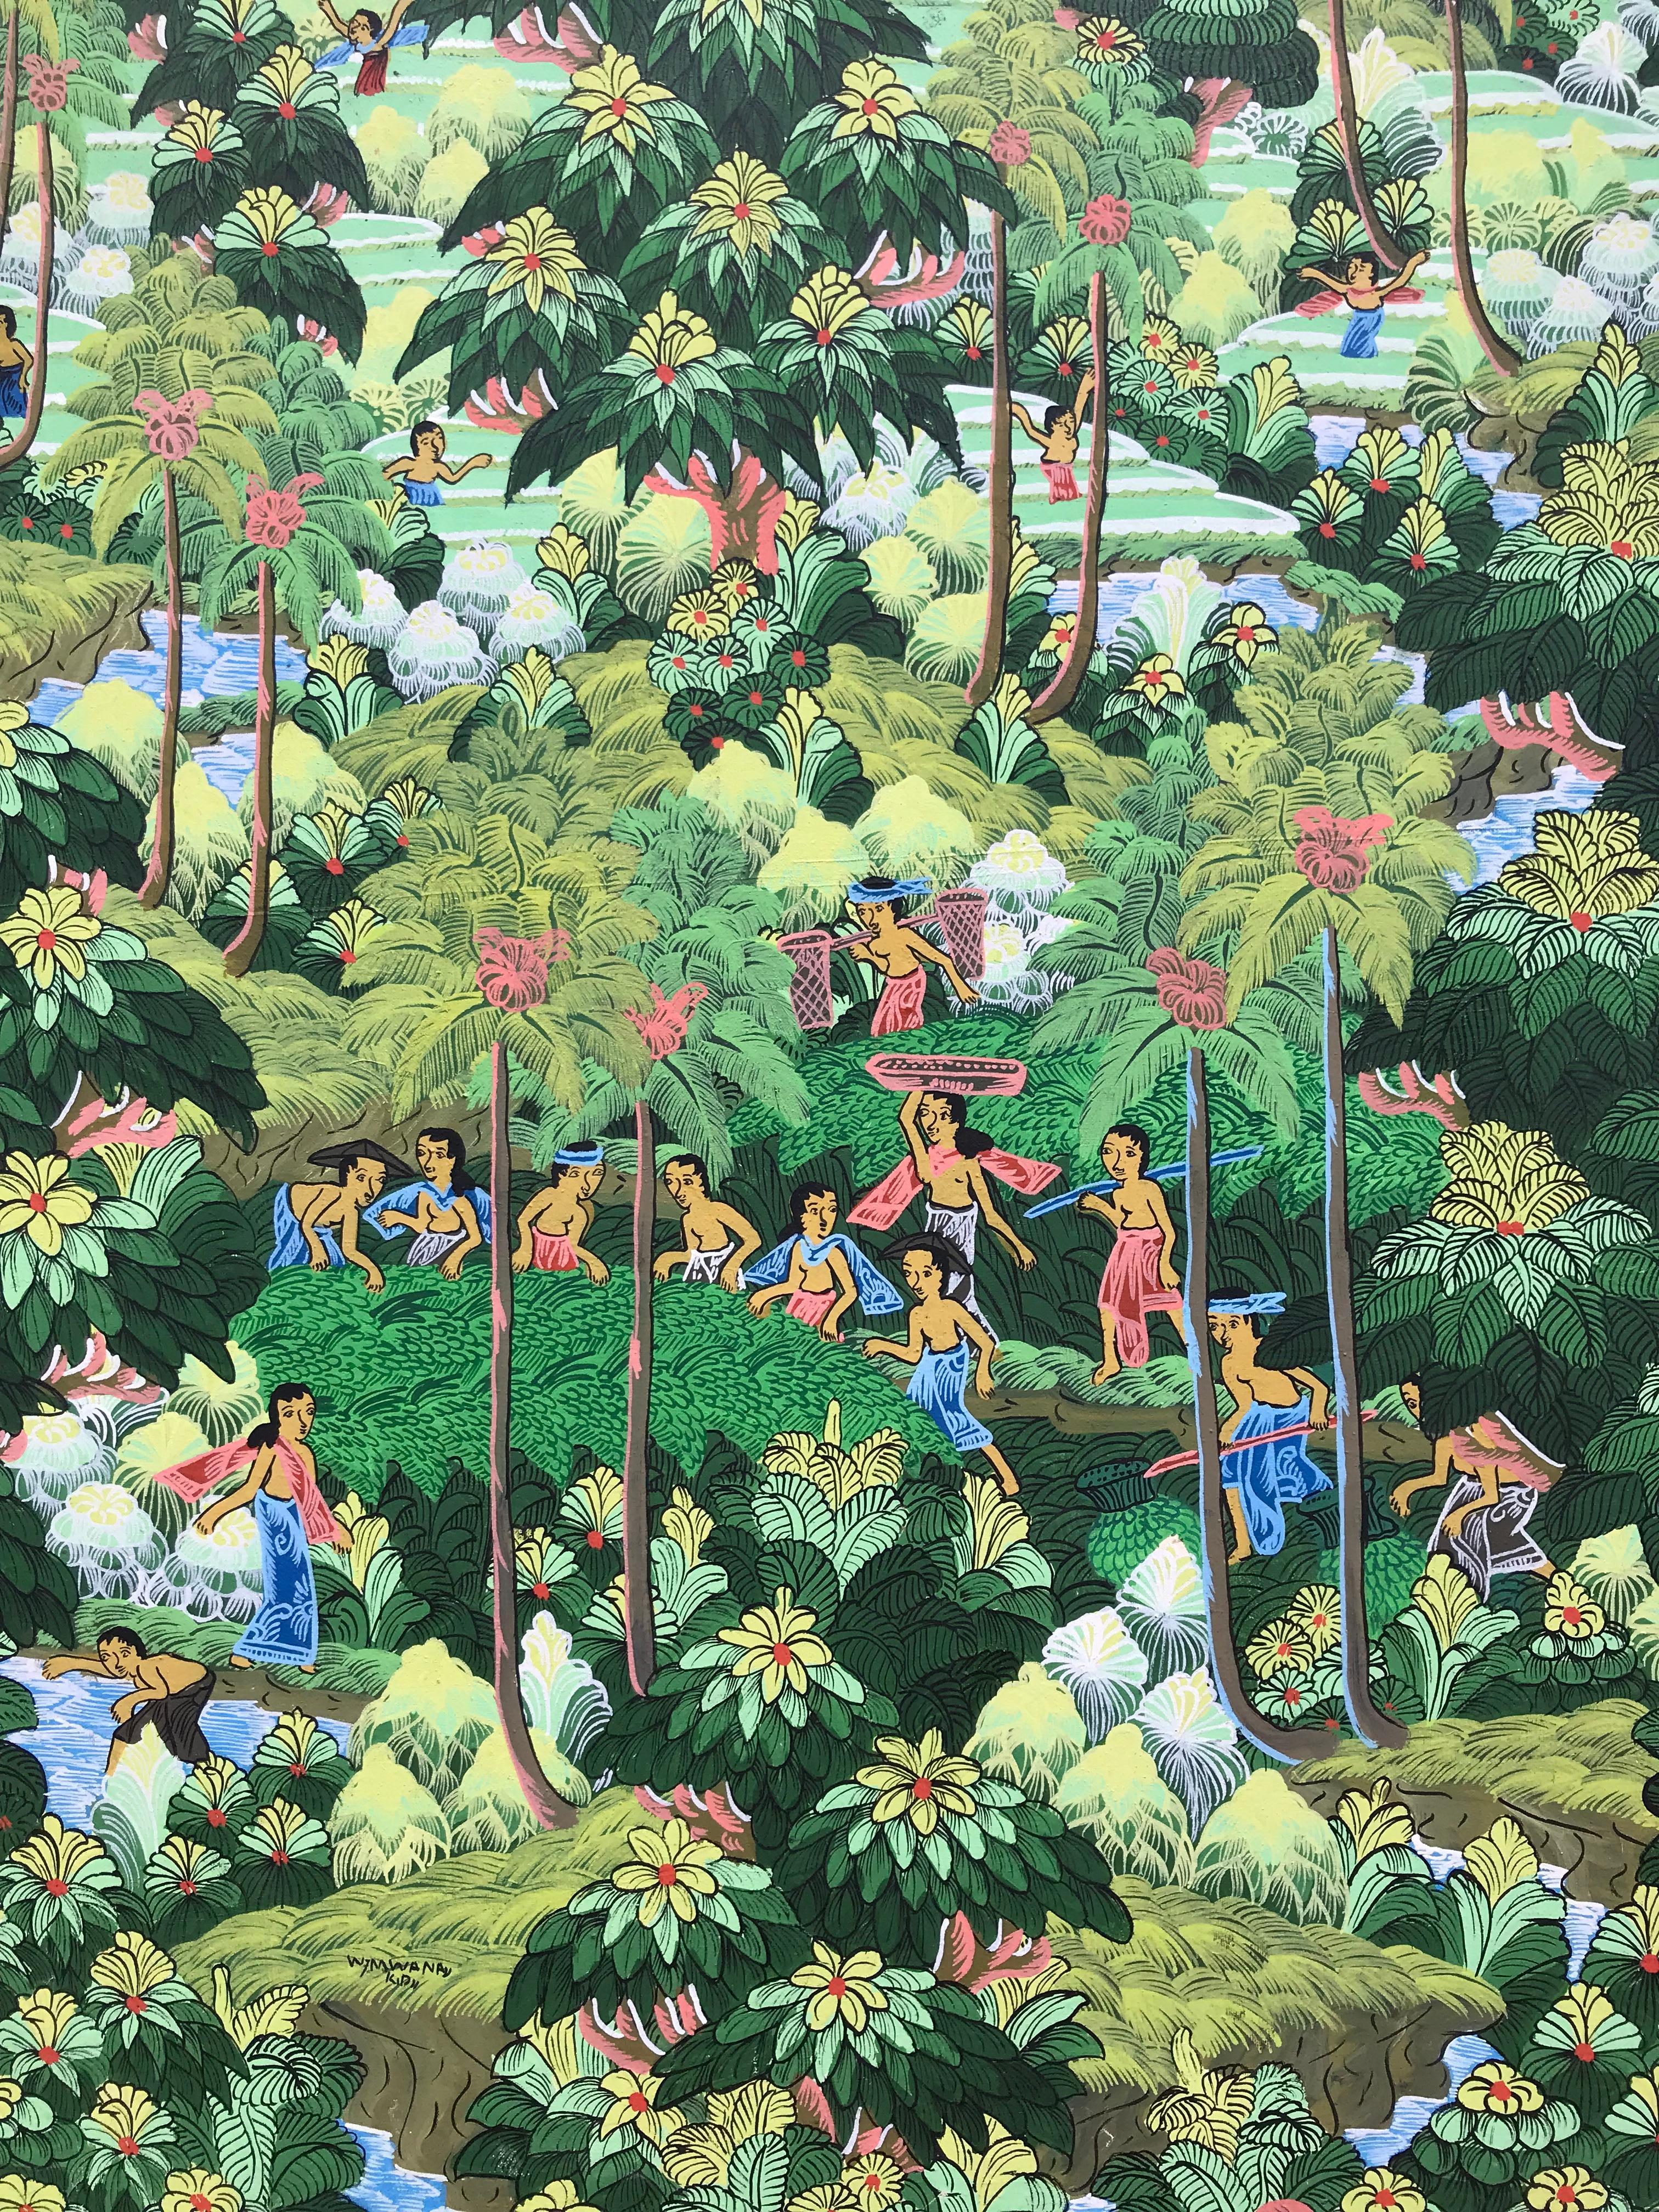 “Balinese Figural Landscape 1” - Contemporary Painting by Unknown